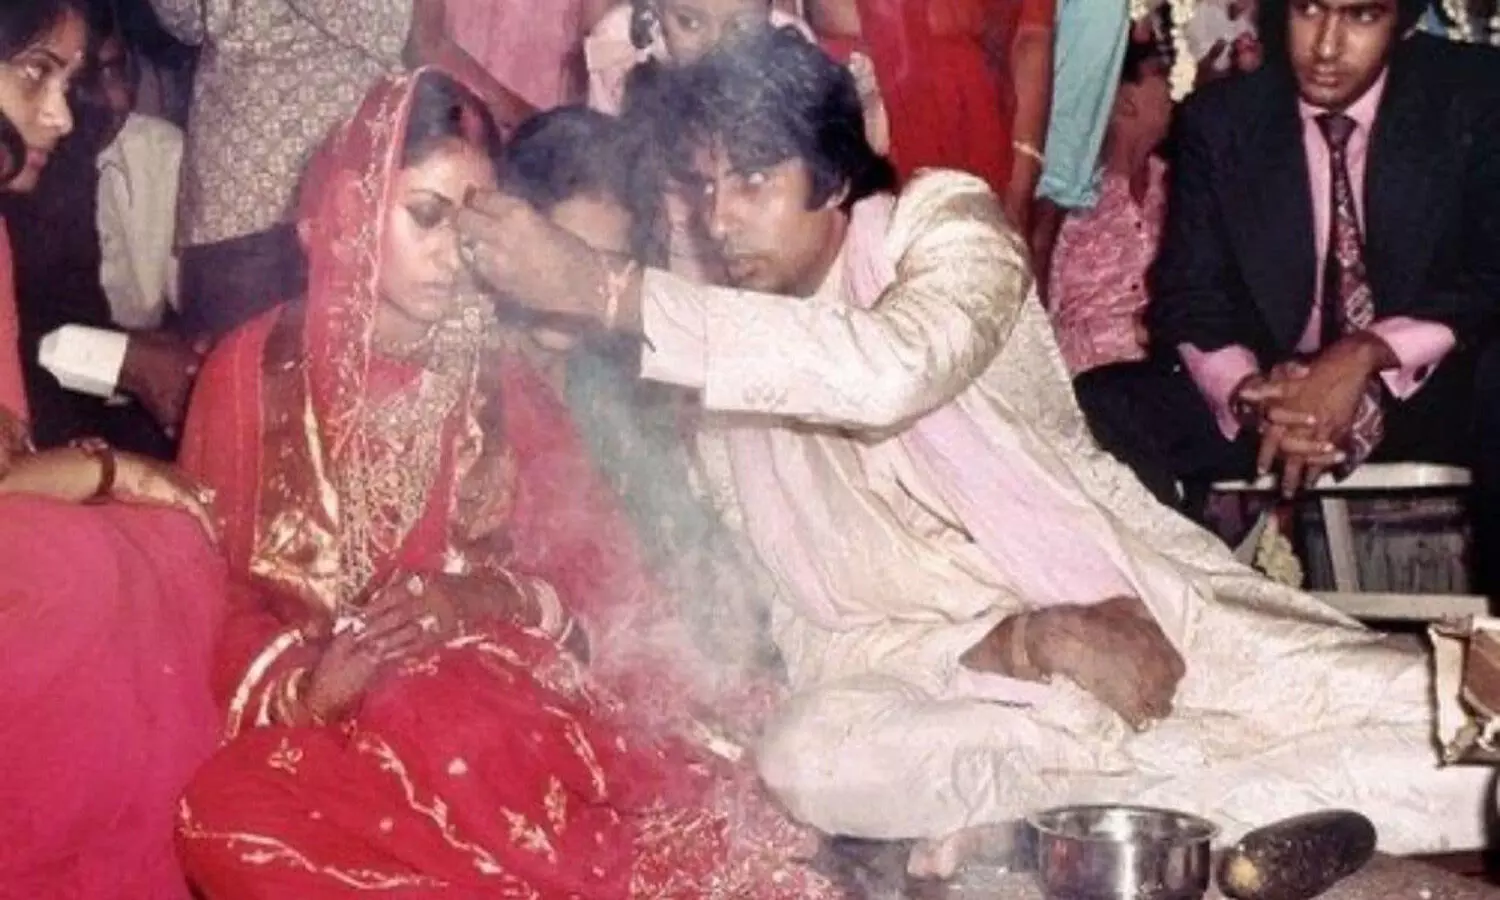 Amitabh Bachchan shares unseen PIC with Jaya Bachchan on wedding anniversary; Thanks fans for greetings